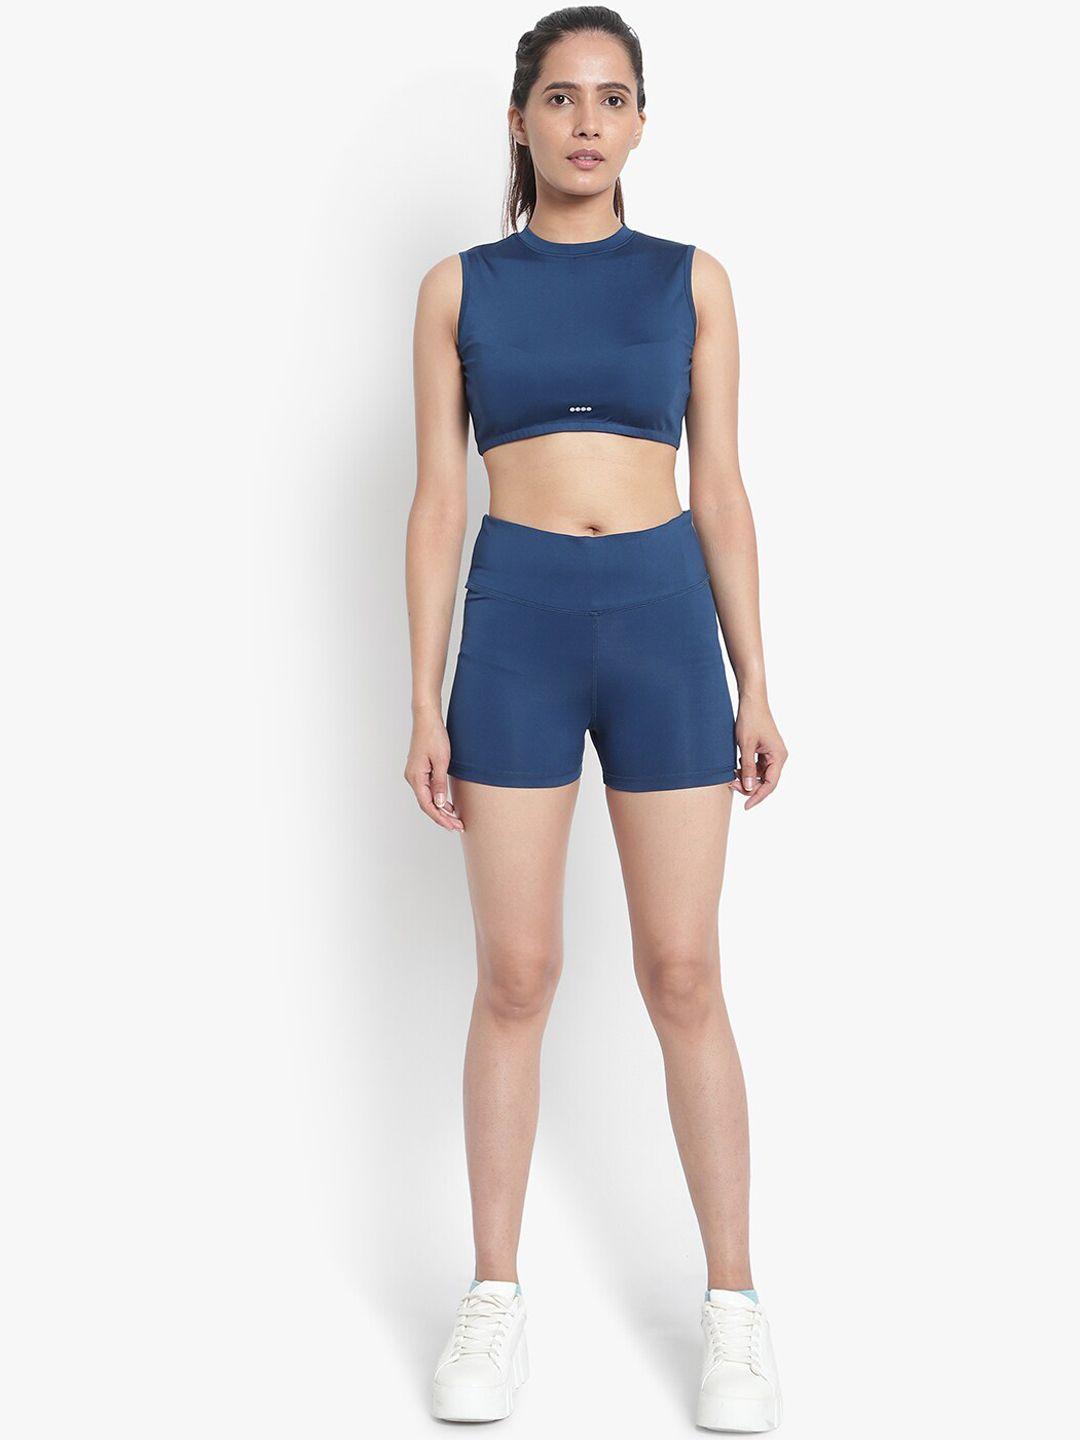 wearjukebox women blue solid top with shorts